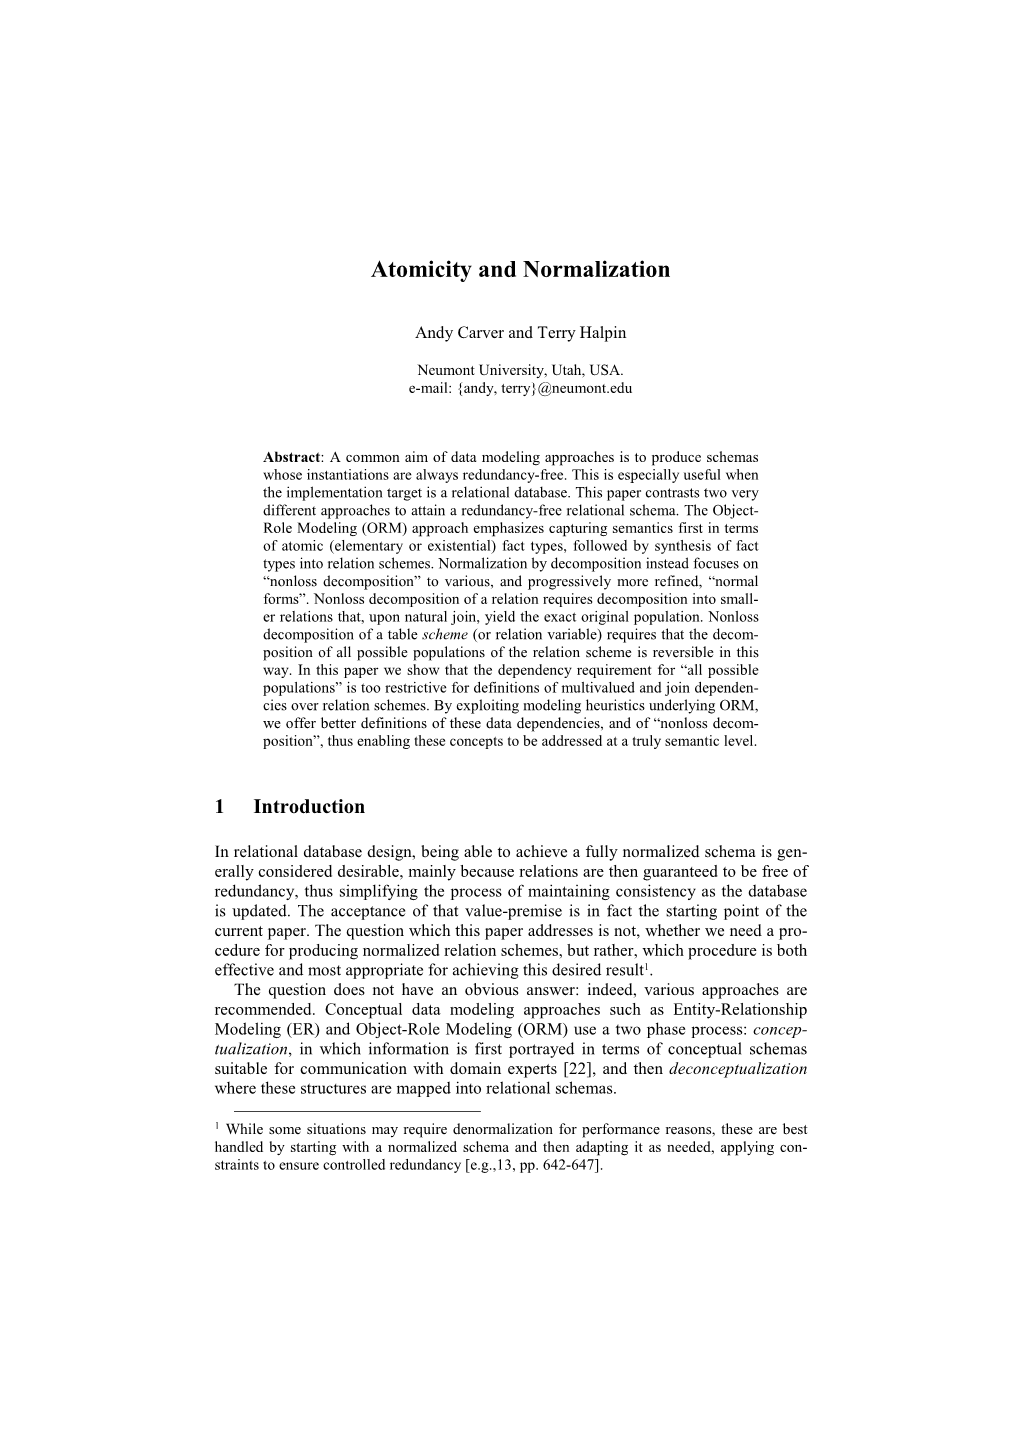 Atomicity and Normalization